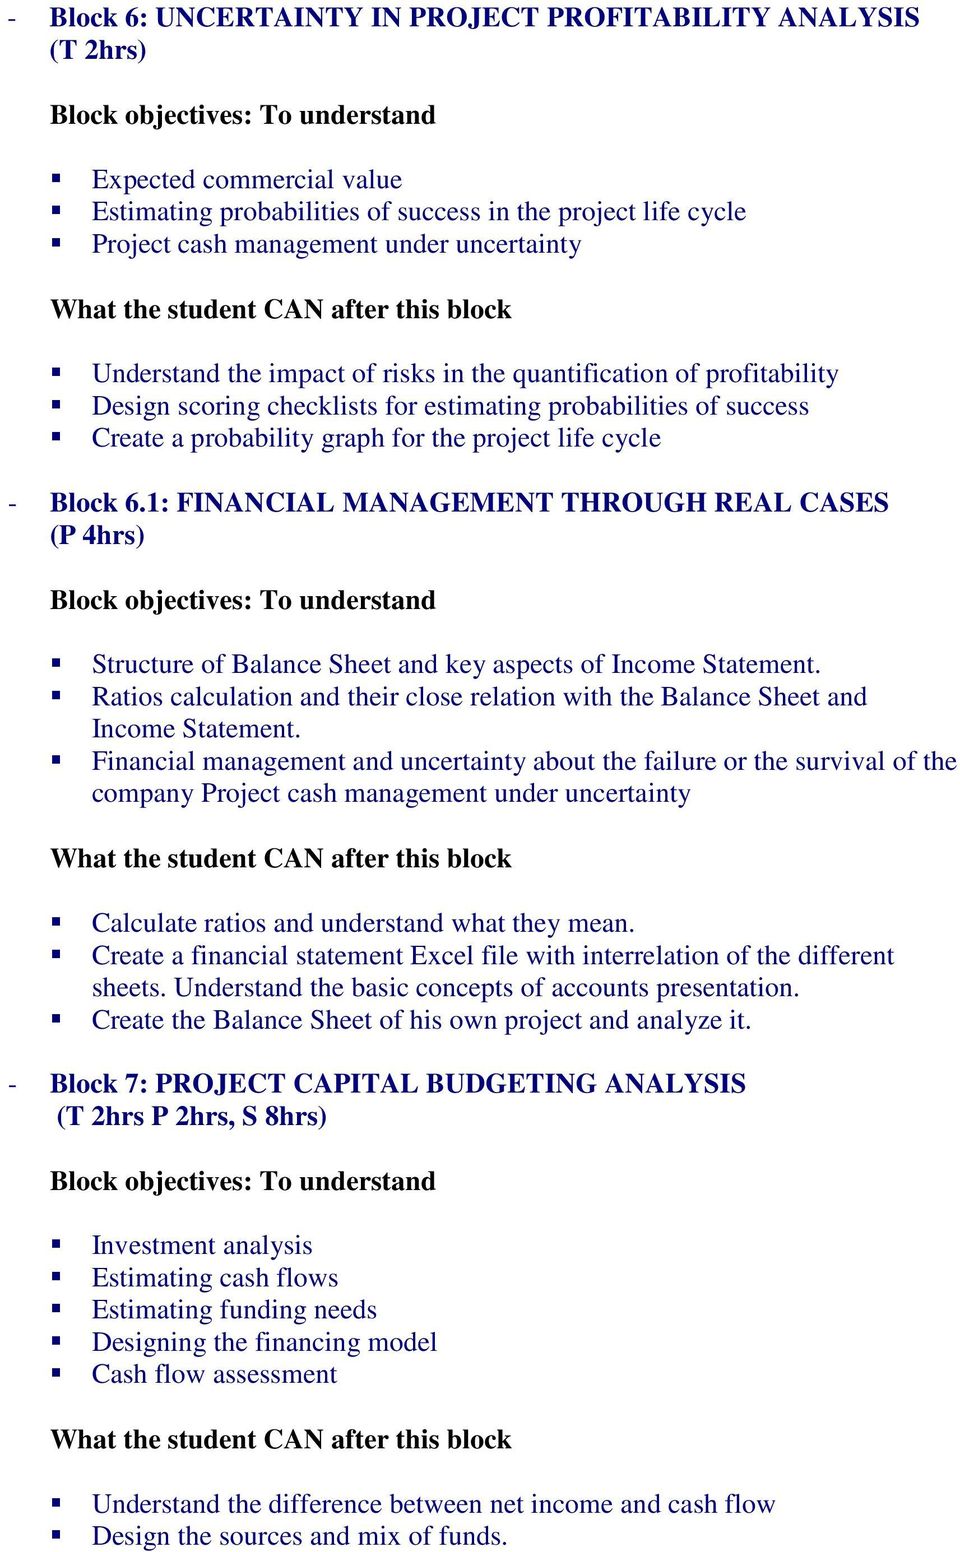 1: FINANCIAL MANAGEMENT THROUGH REAL CASES (P 4hrs) Structure of Balance Sheet and key aspects of Income Statement.